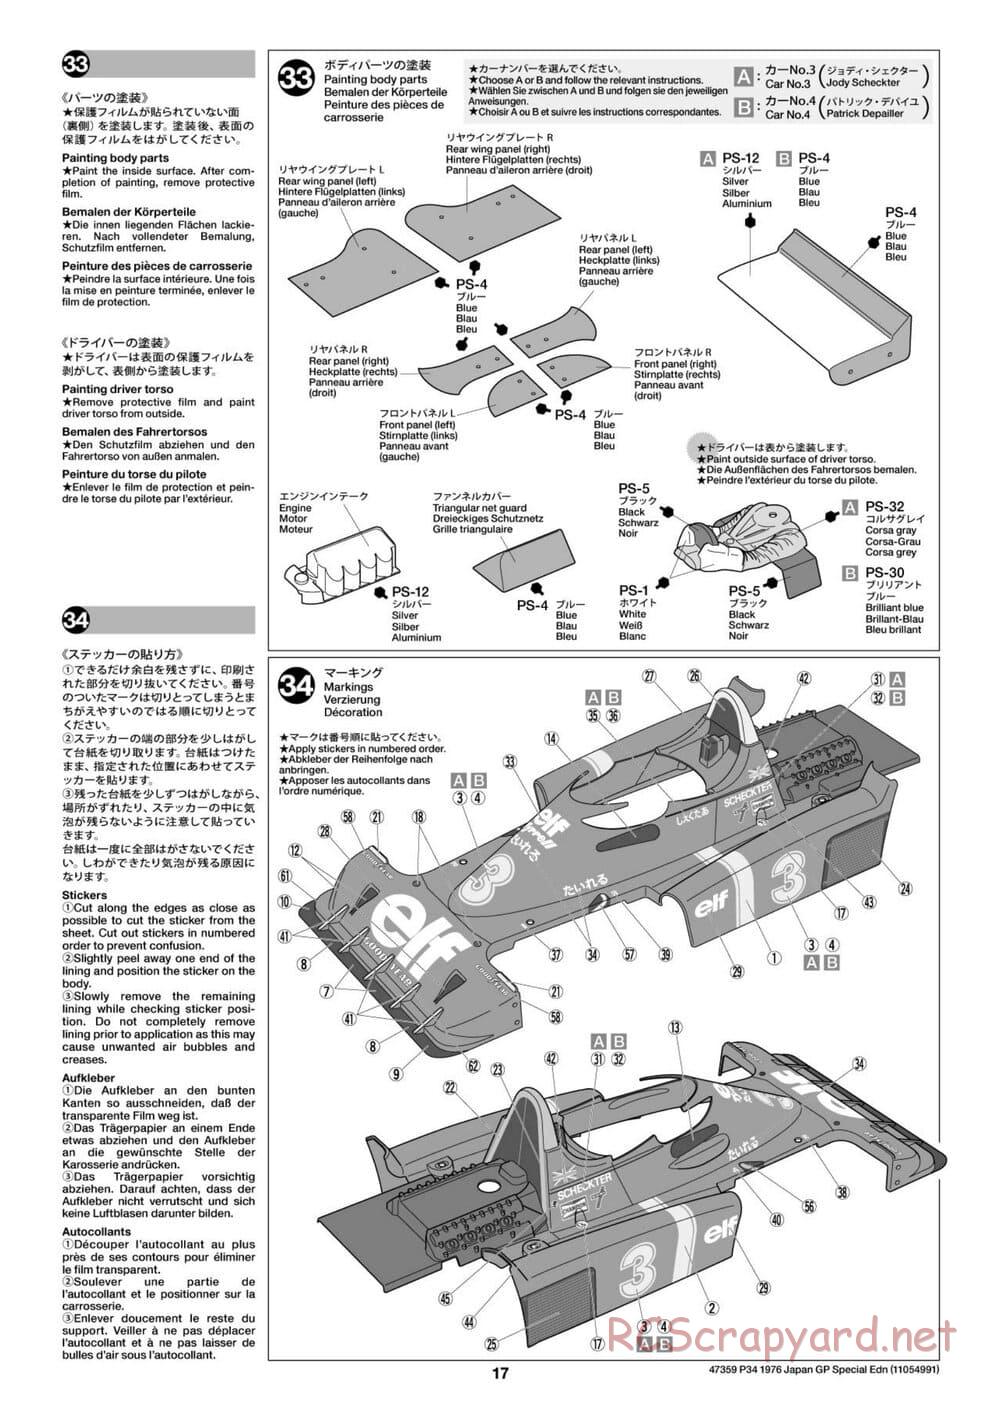 Tamiya - Tyrrell P34 1976 Japan Grand Prix Special - F103-6W Chassis - Manual - Page 17